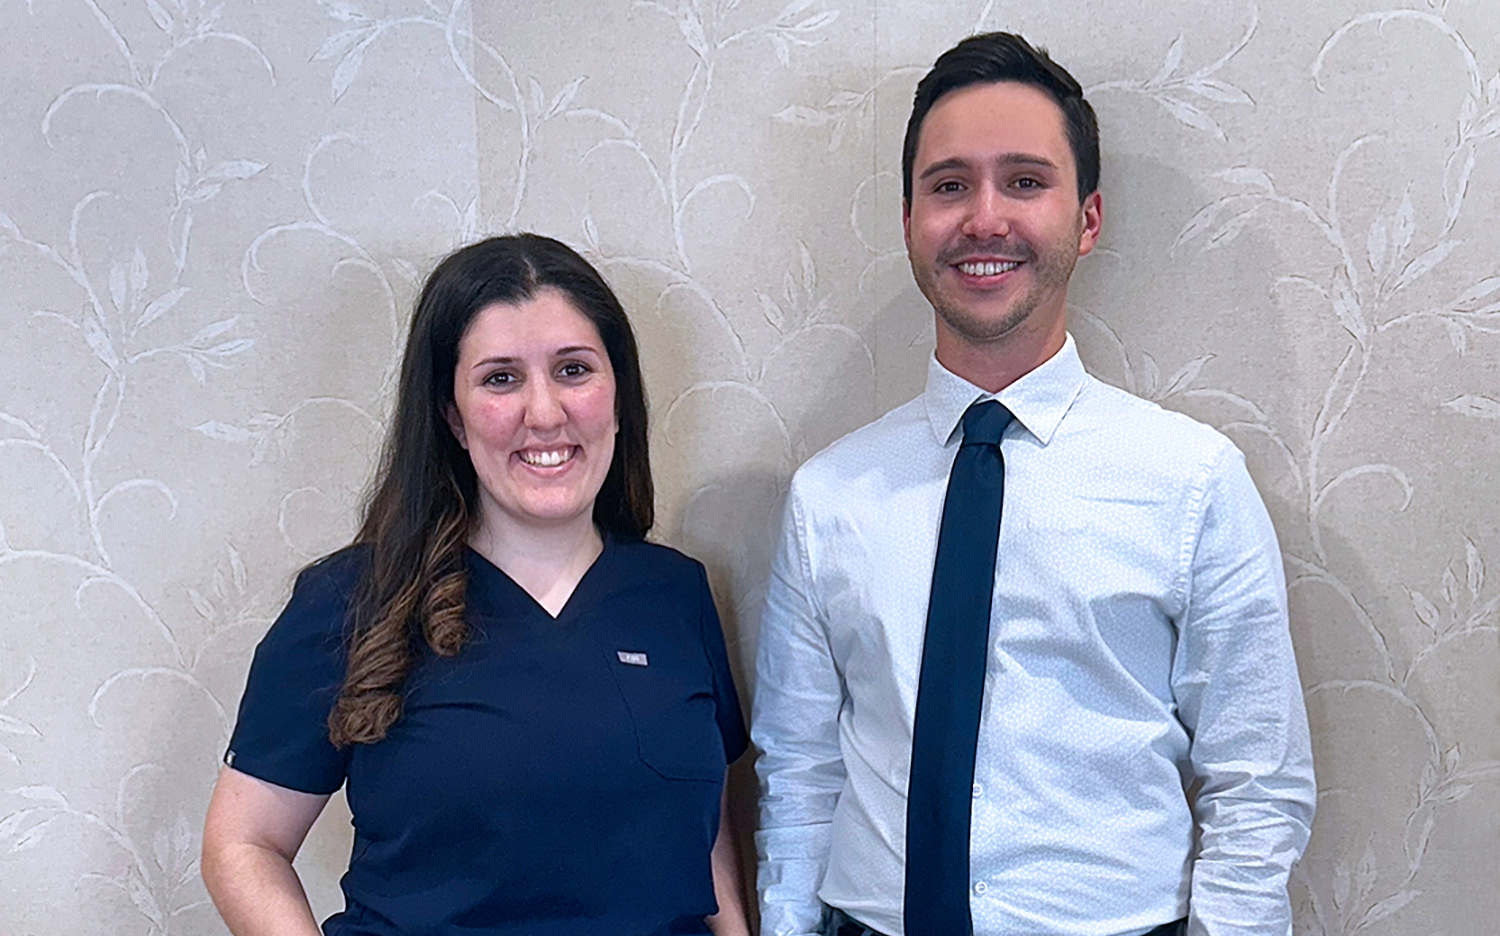 Oak Knoll Healthcare Center’s Administrator Anthony Wriston and Director of Nursing Francesca Caramante bring a passion for advocating for the geriatric population, and for bettering the customer service experience.